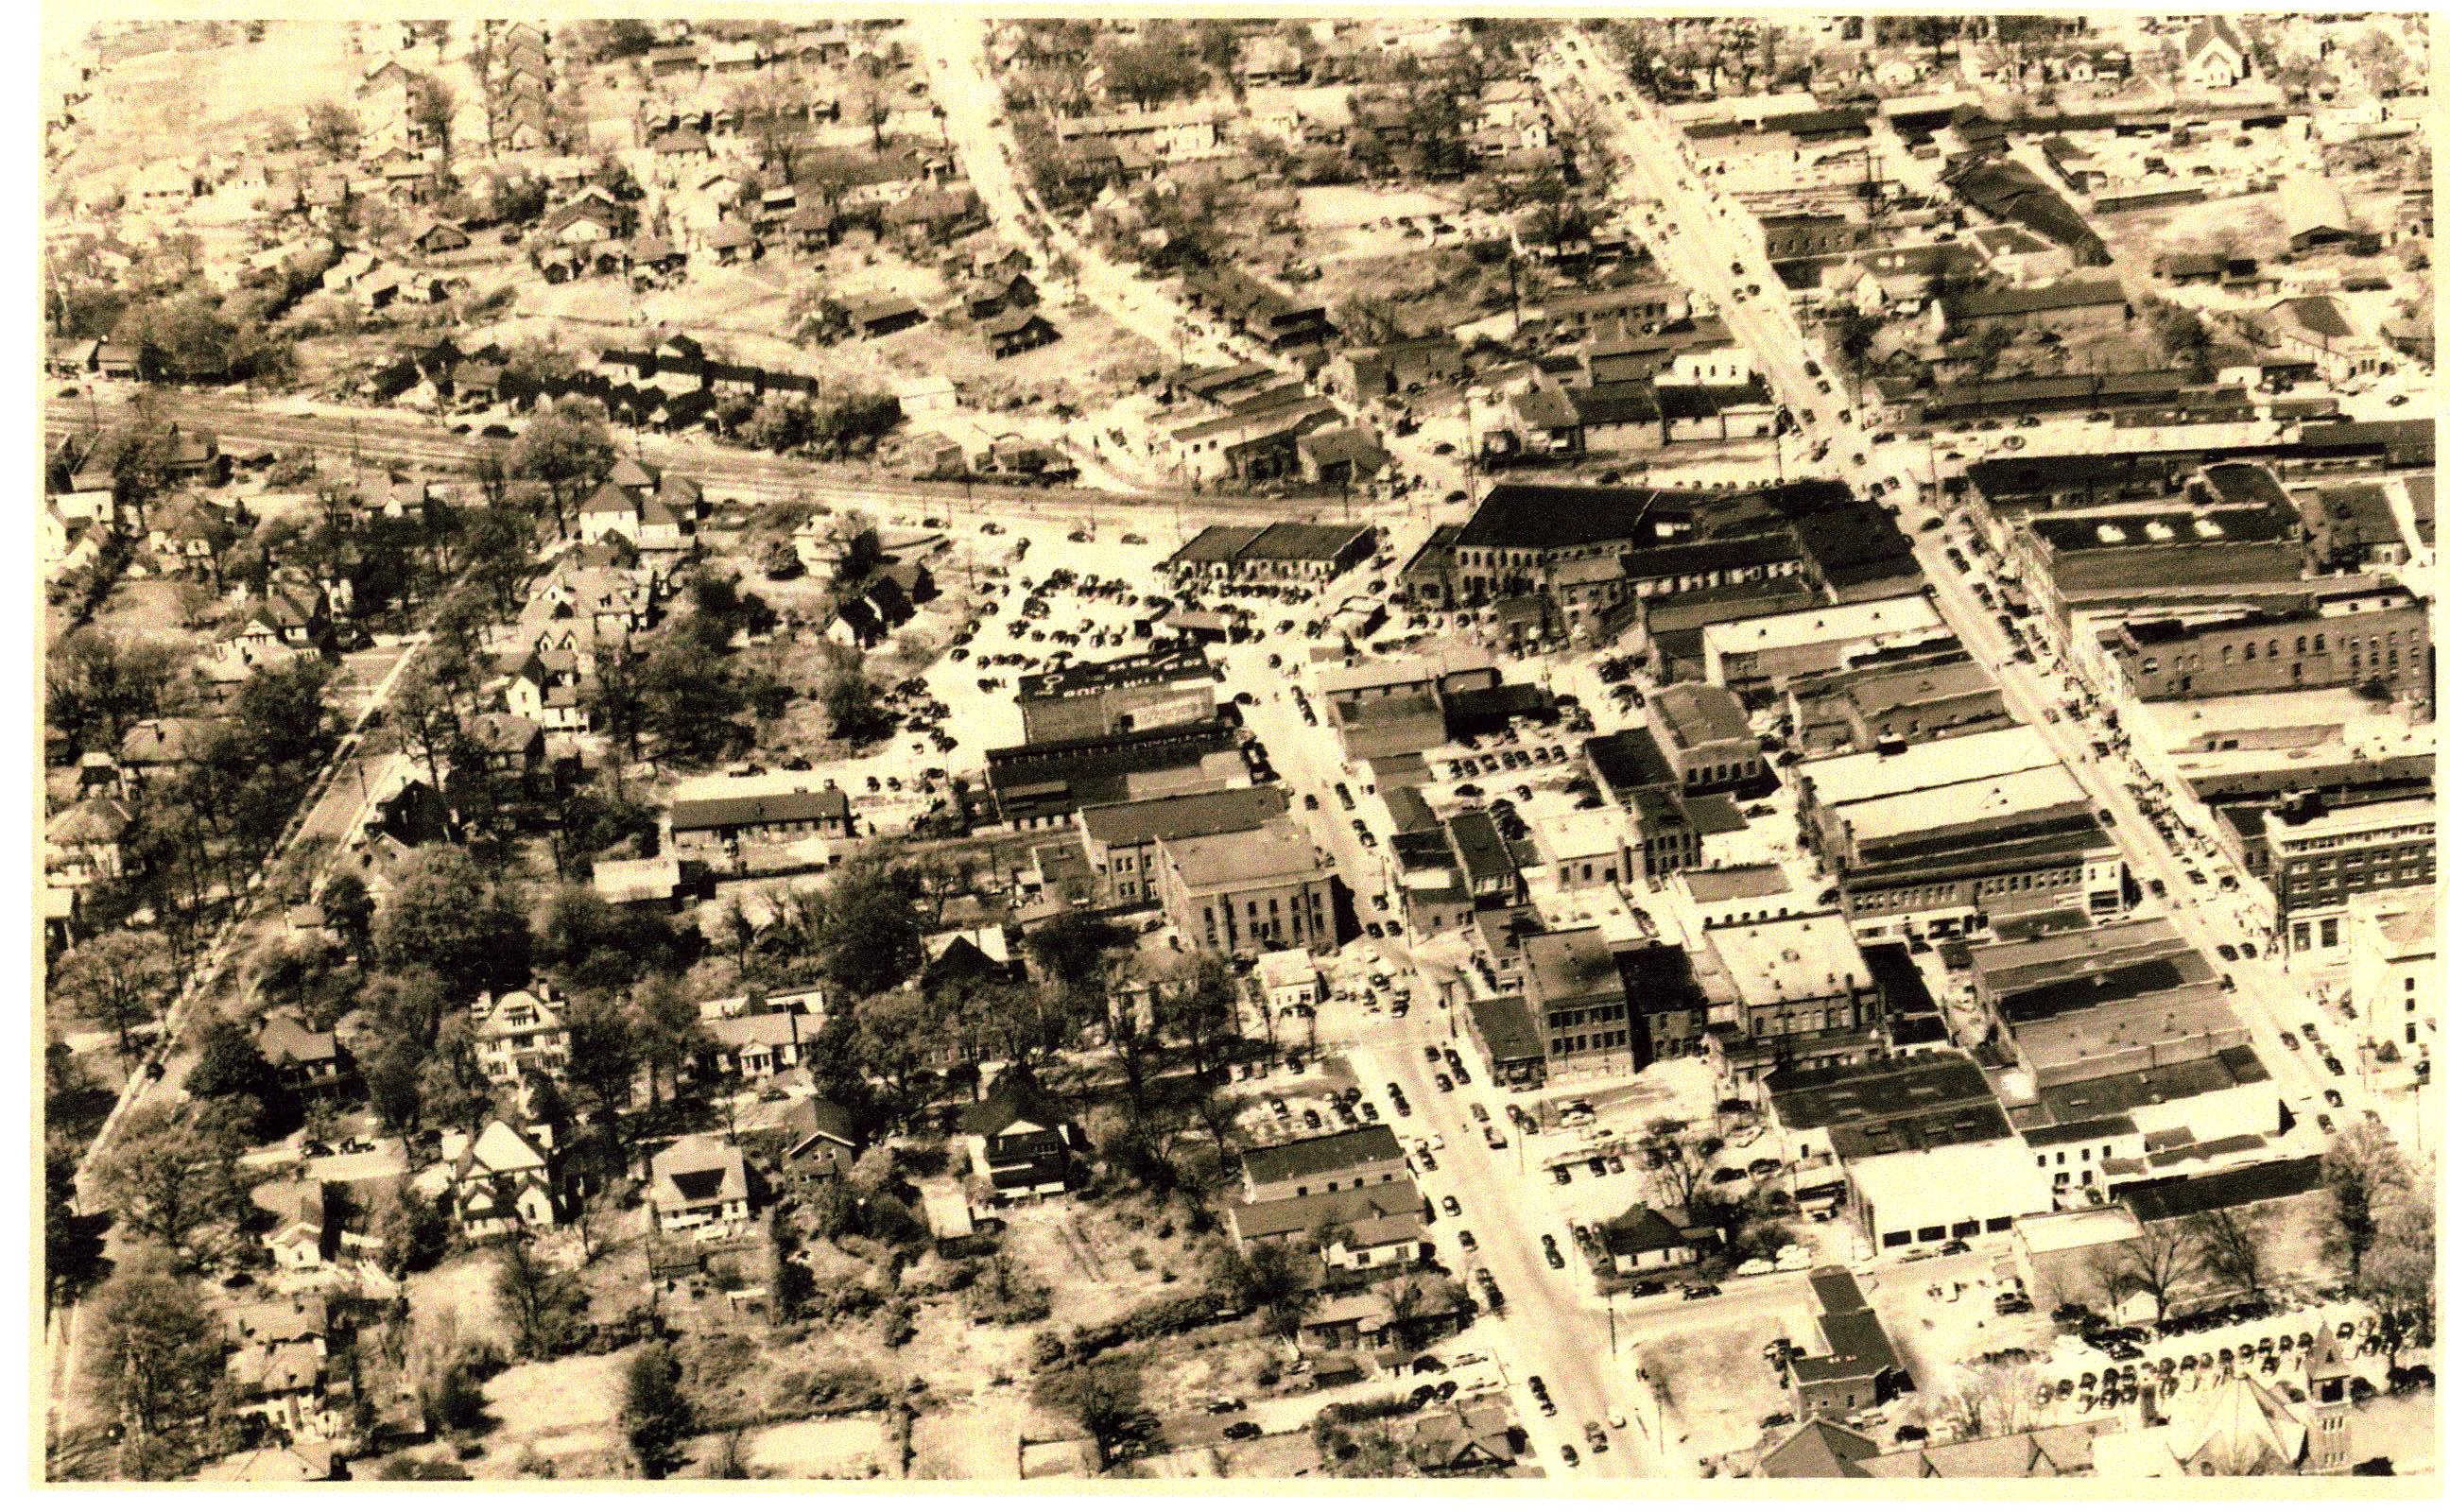 Ariel Image of Downtown Rock Hill